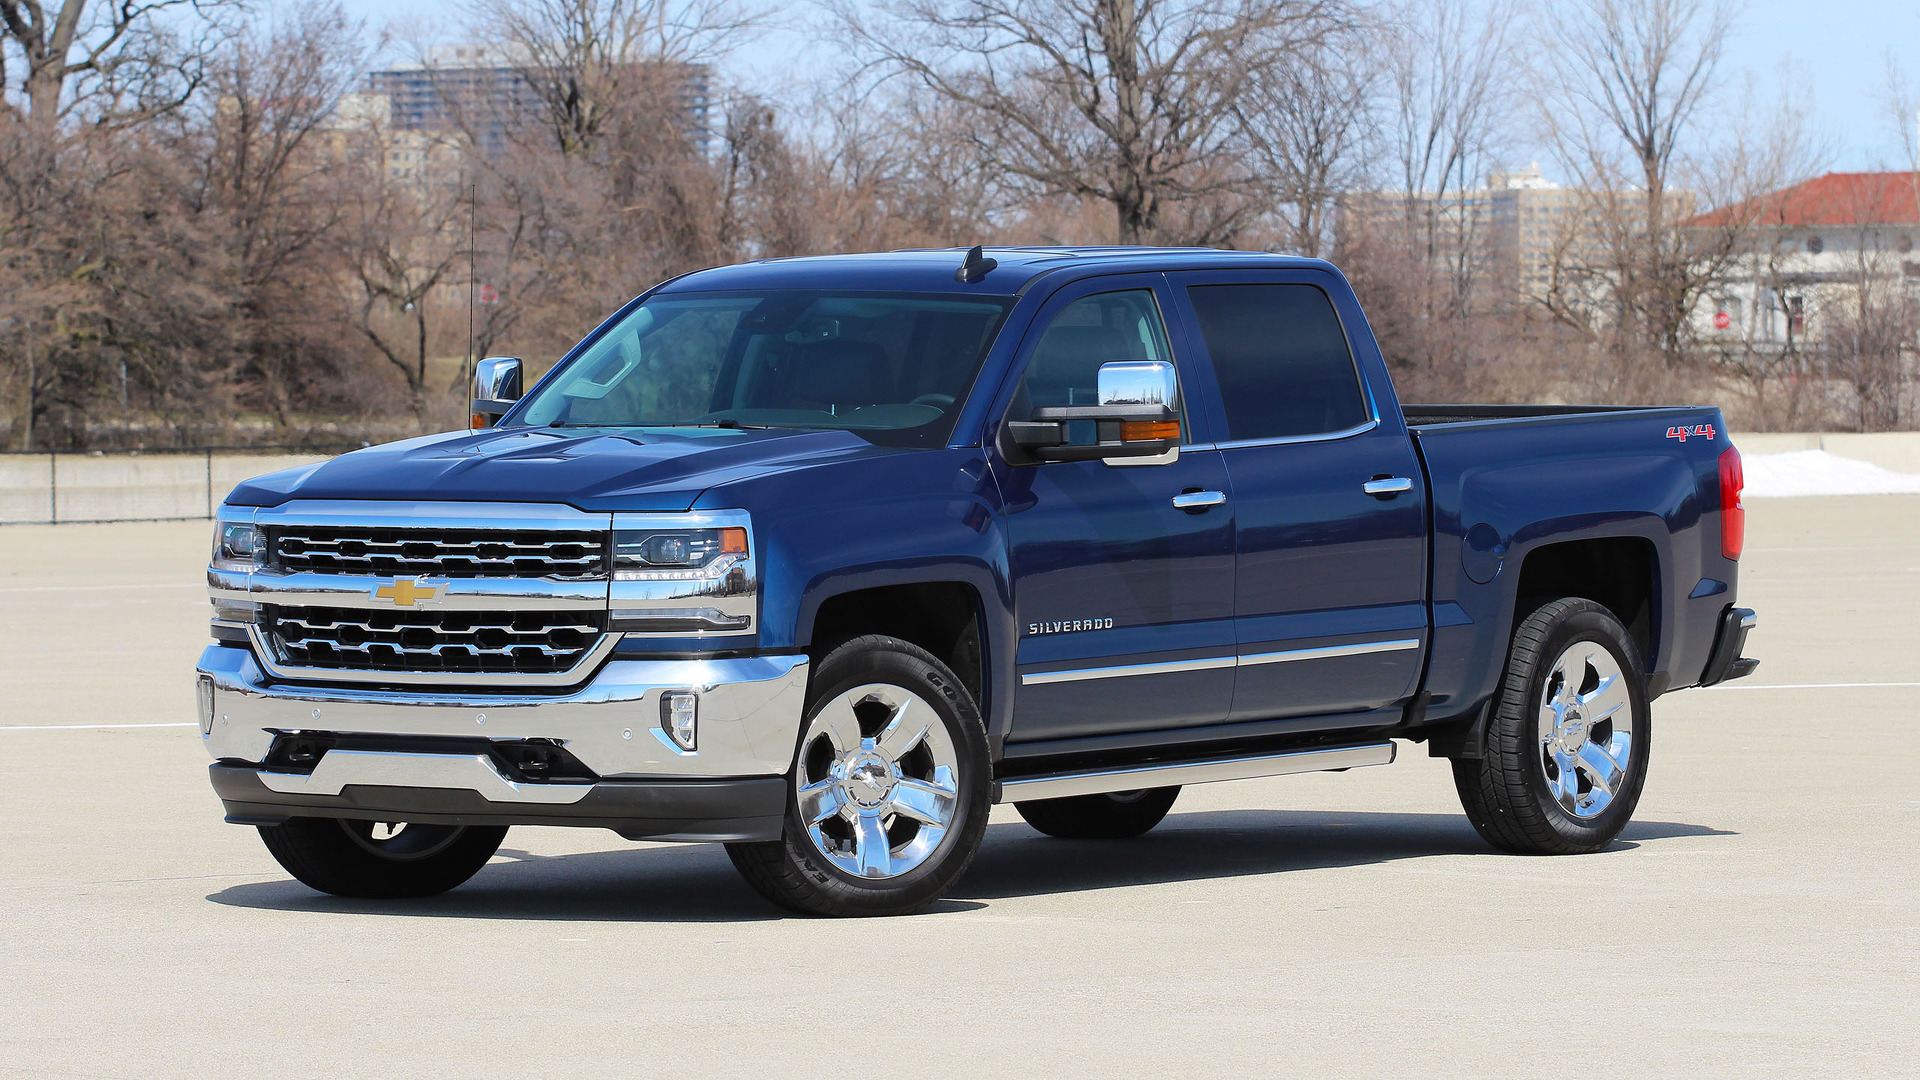 2017 Chevy Silverado 1500 Review: A Main Event At The Biggest Game ...